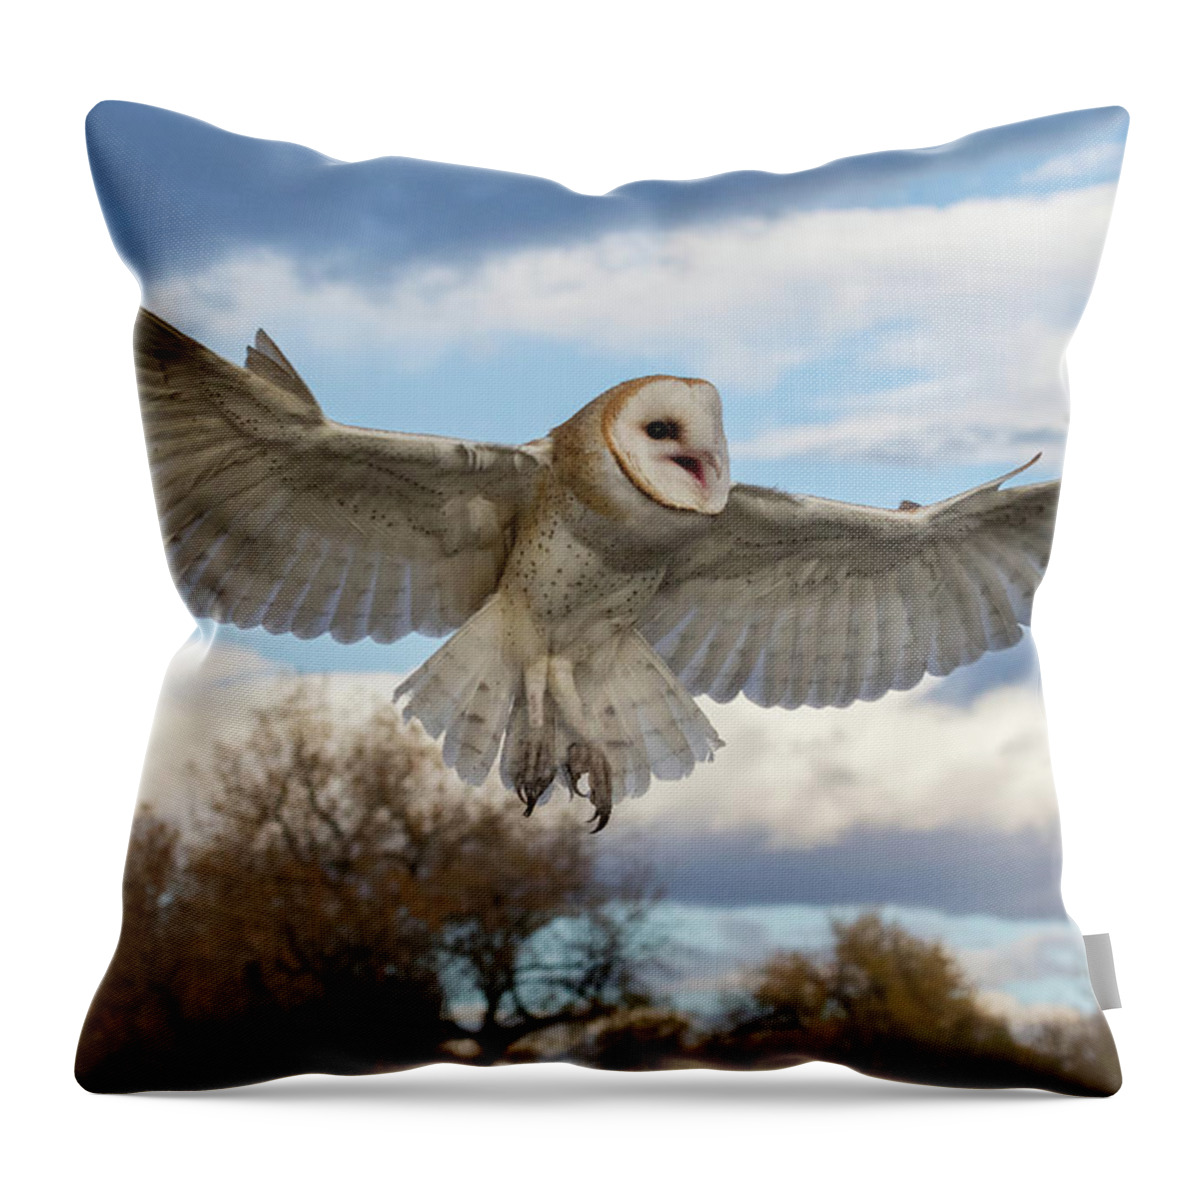 Barn Owl Throw Pillow featuring the photograph Barn Owl Makes a Happy Landing by Tony Hake